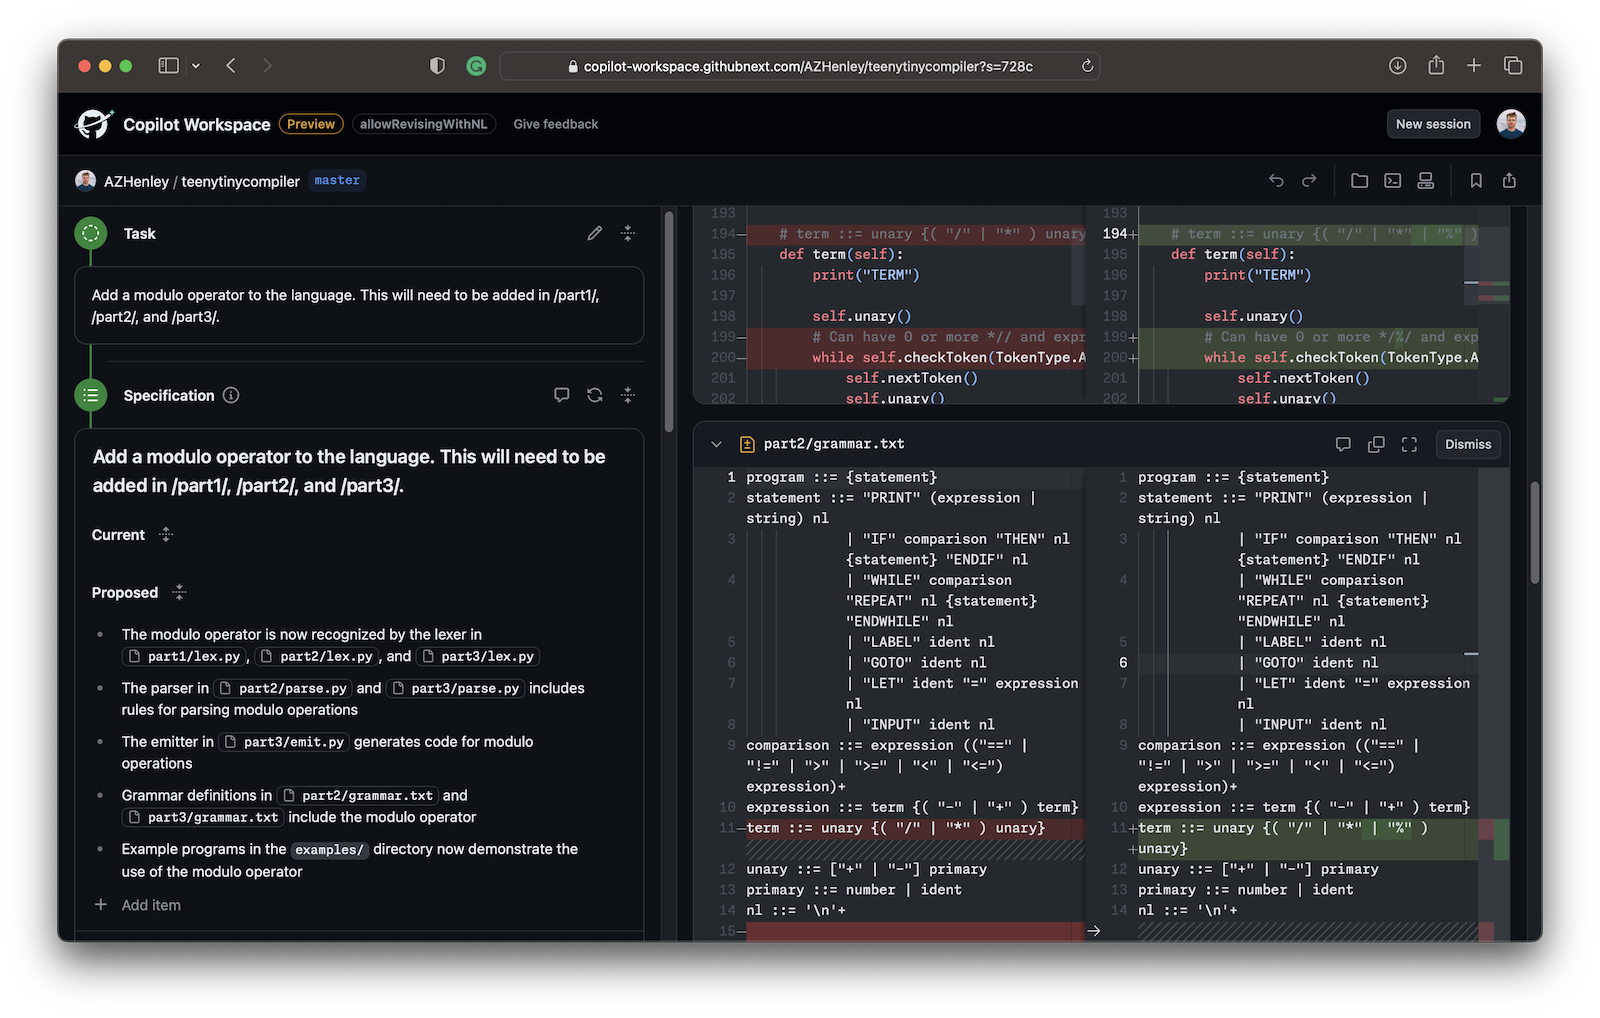 Screenshot of Copilot Workspace. Showing the task description and plan on the left, and a diff of the proposed code changes on the right.